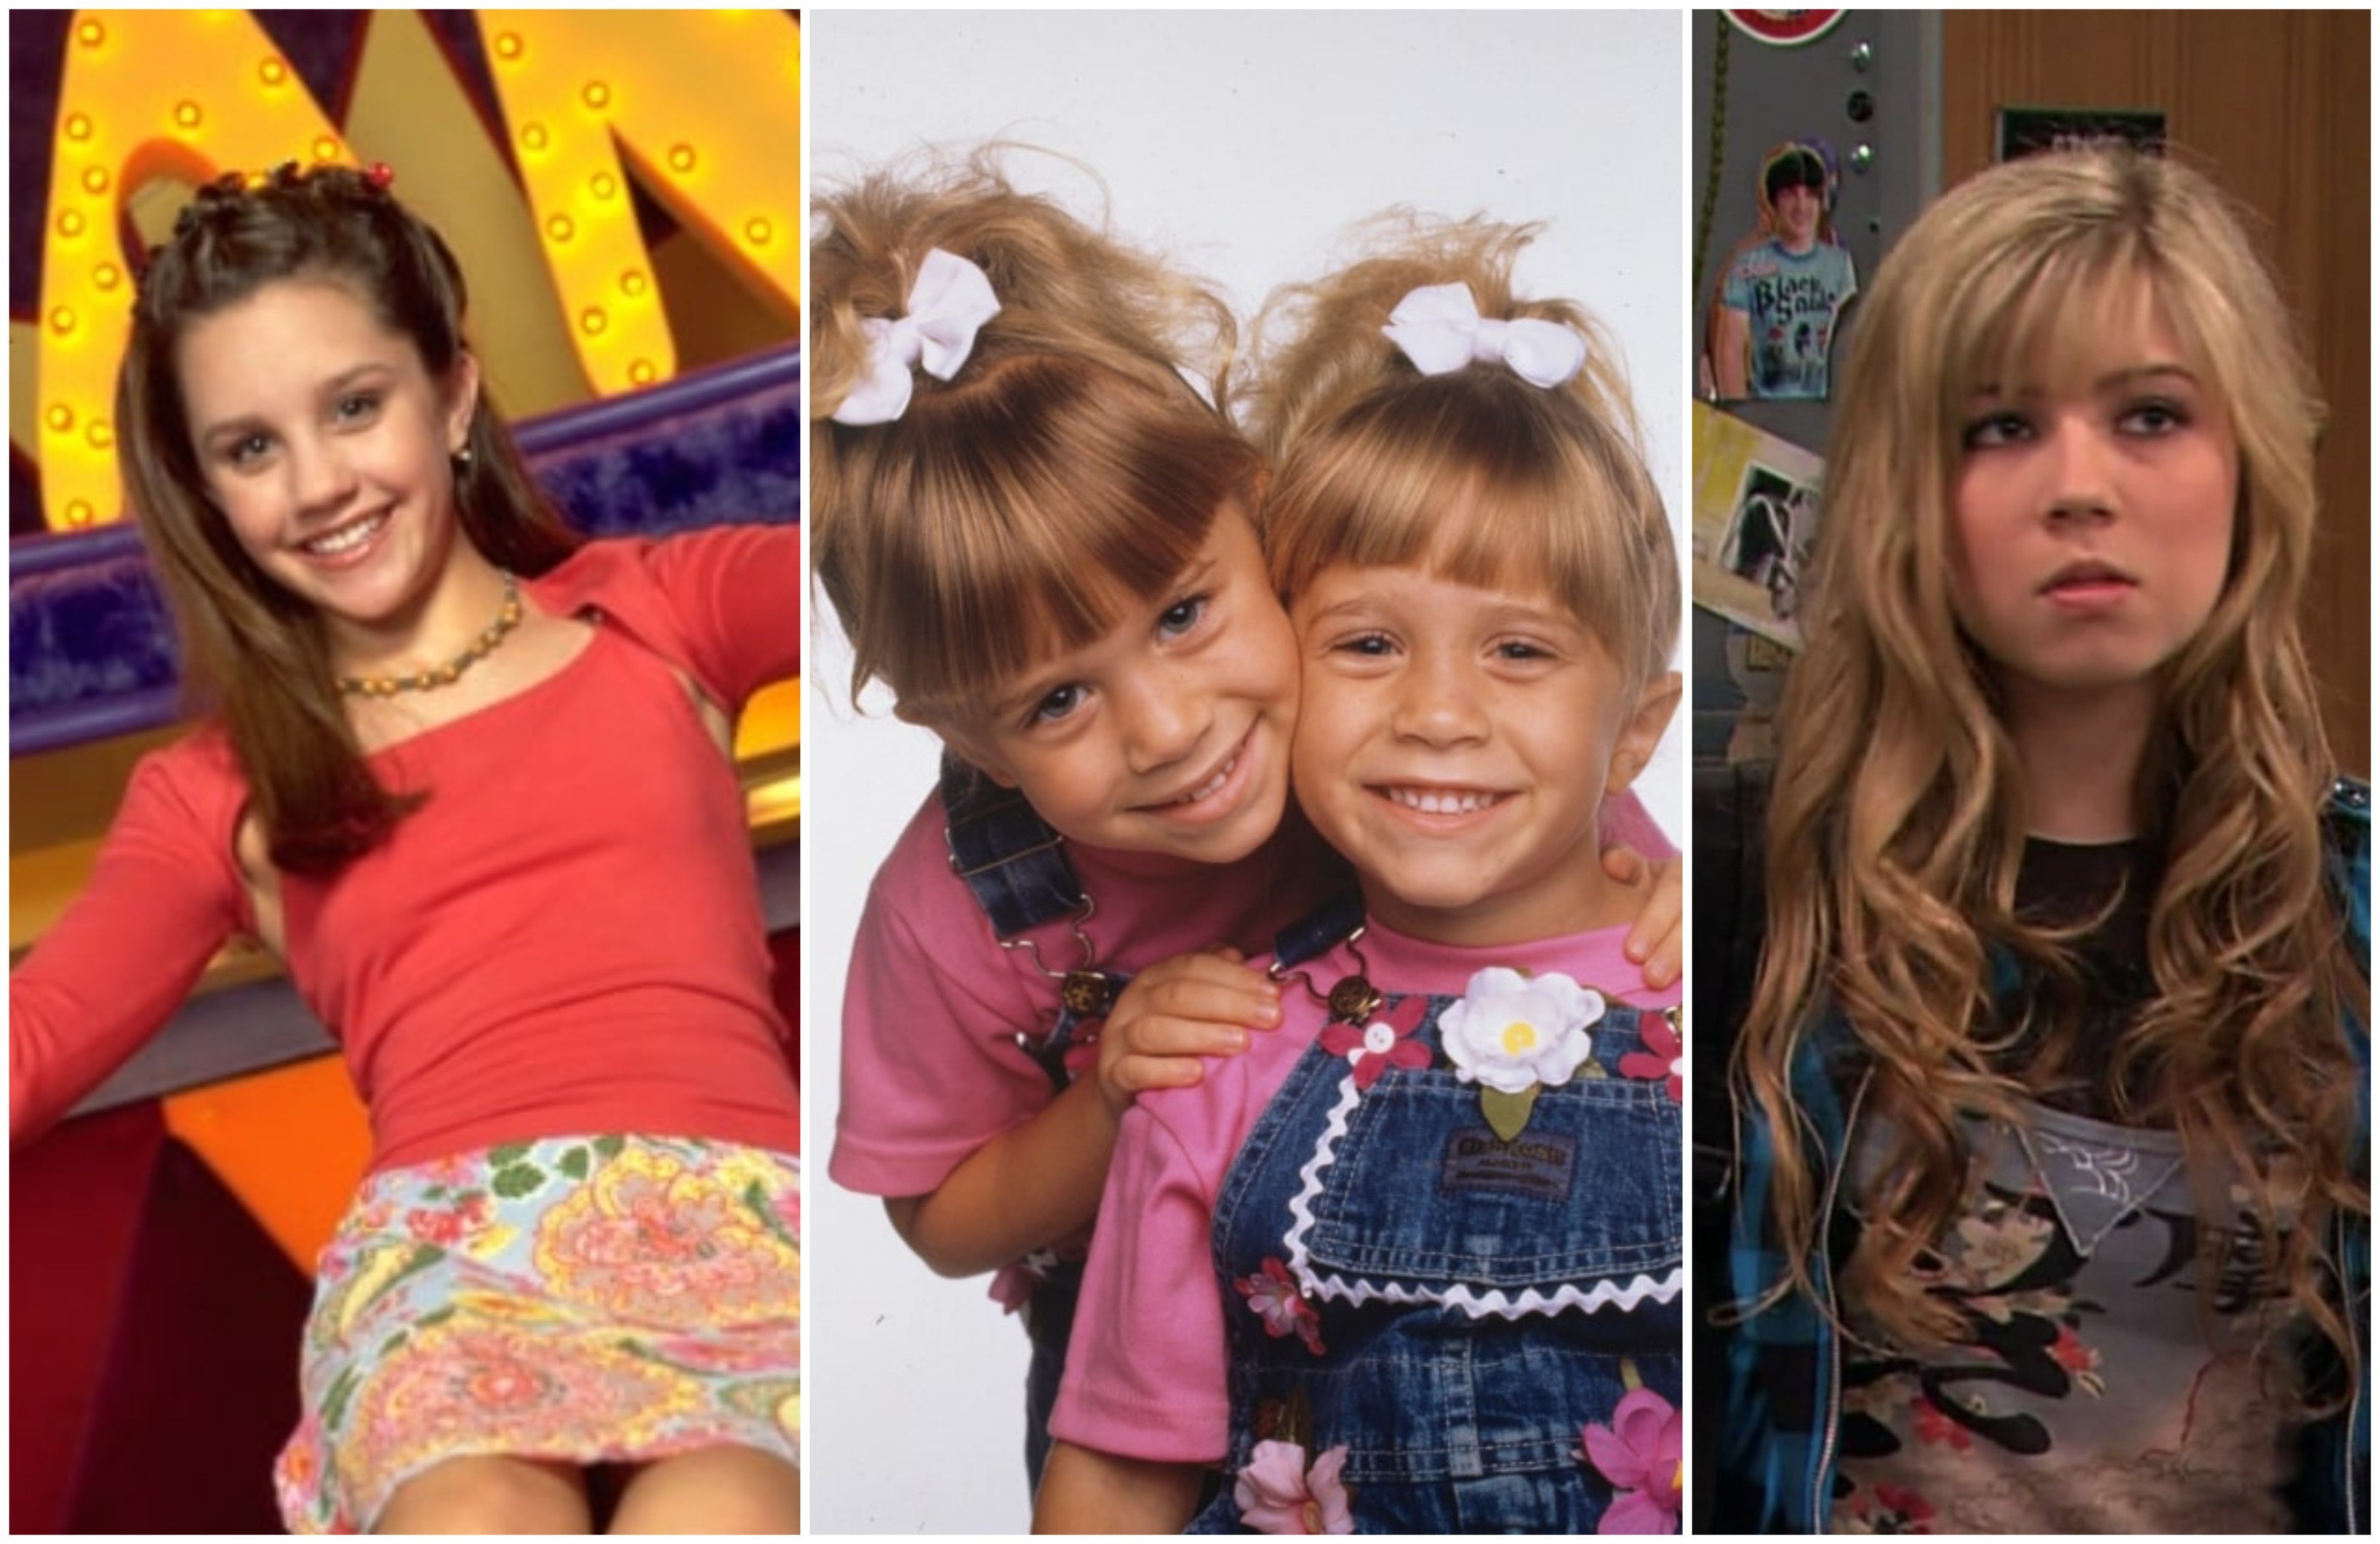 6 female former child stars: what they appeared in and how they are doing now, from Amanda Bynes and the Olsen twins, to iCarly’s Jennette McCurdy. Photos: Handouts